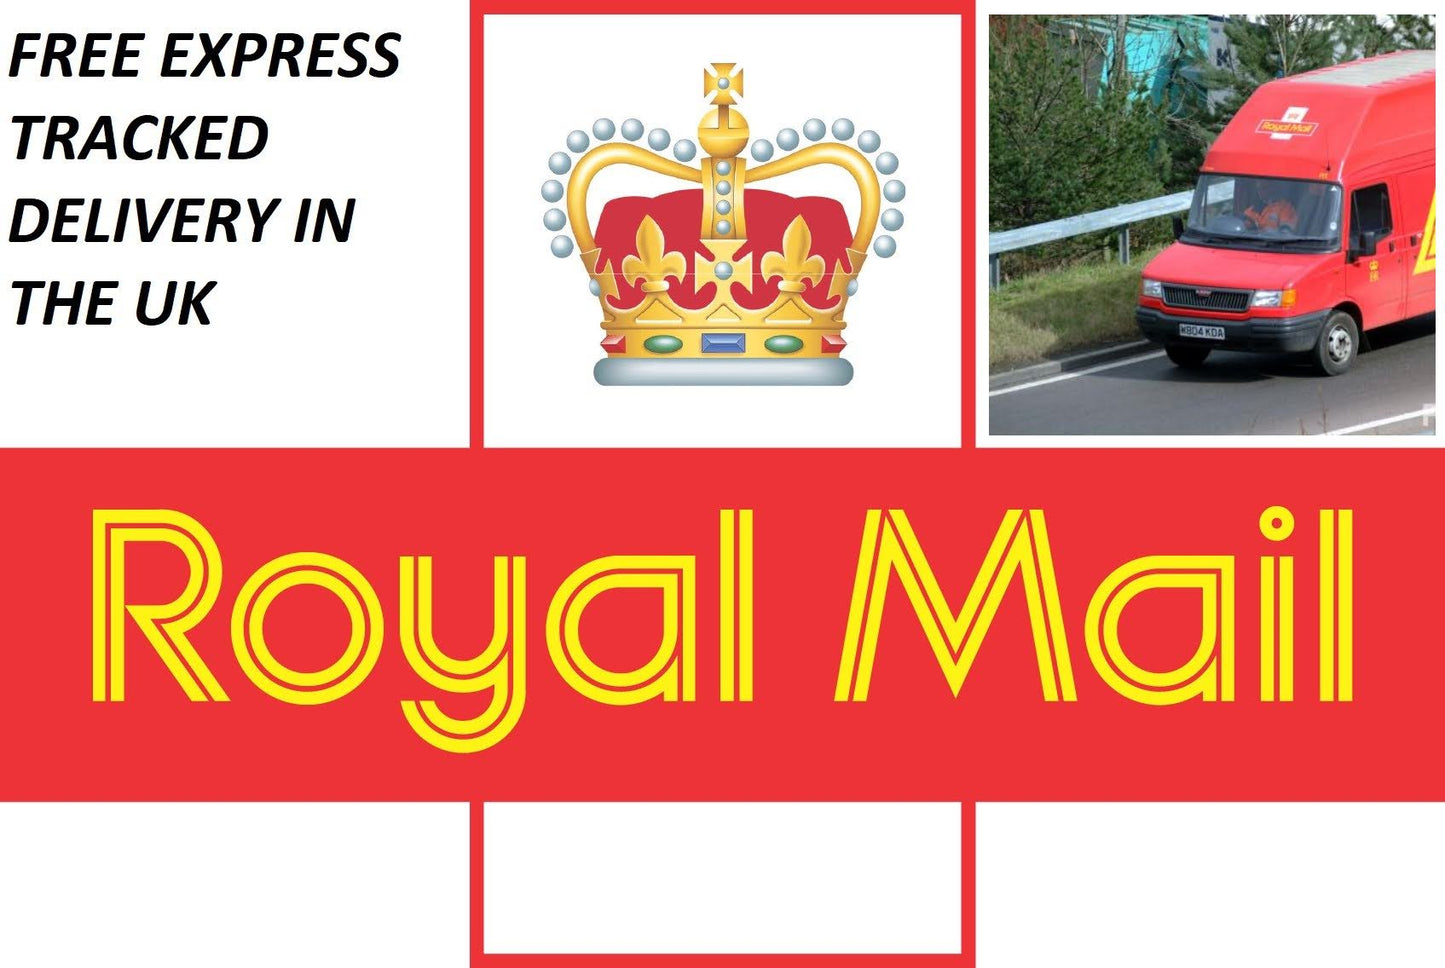 Royal Mail Fast Delivery